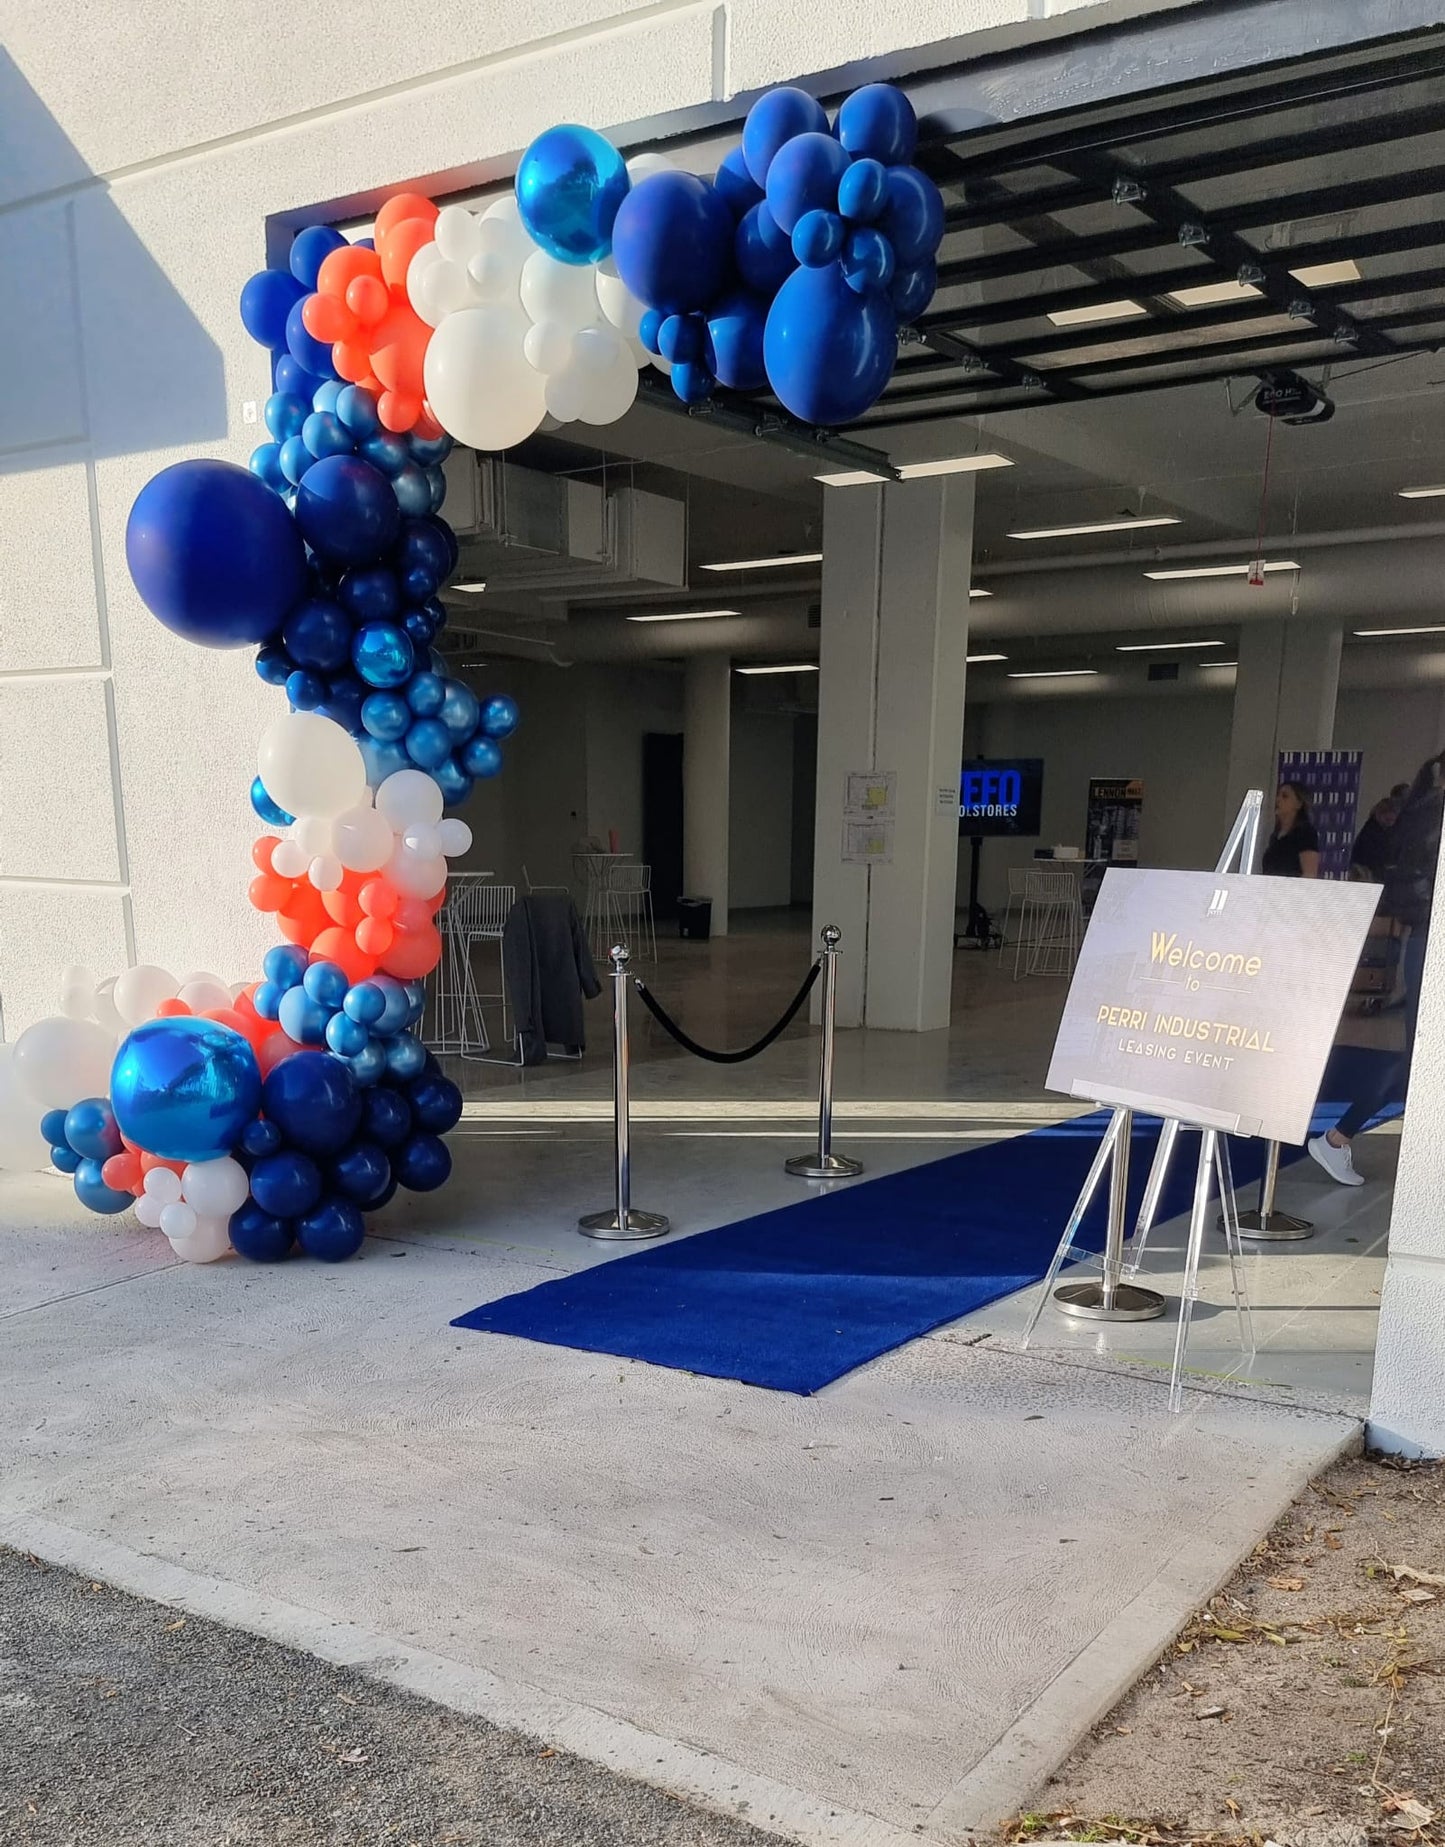 White Blue and Red Prosecco Van Cart Balloon Garland Melbourne Entrance Perri Industrial Leasing Event 